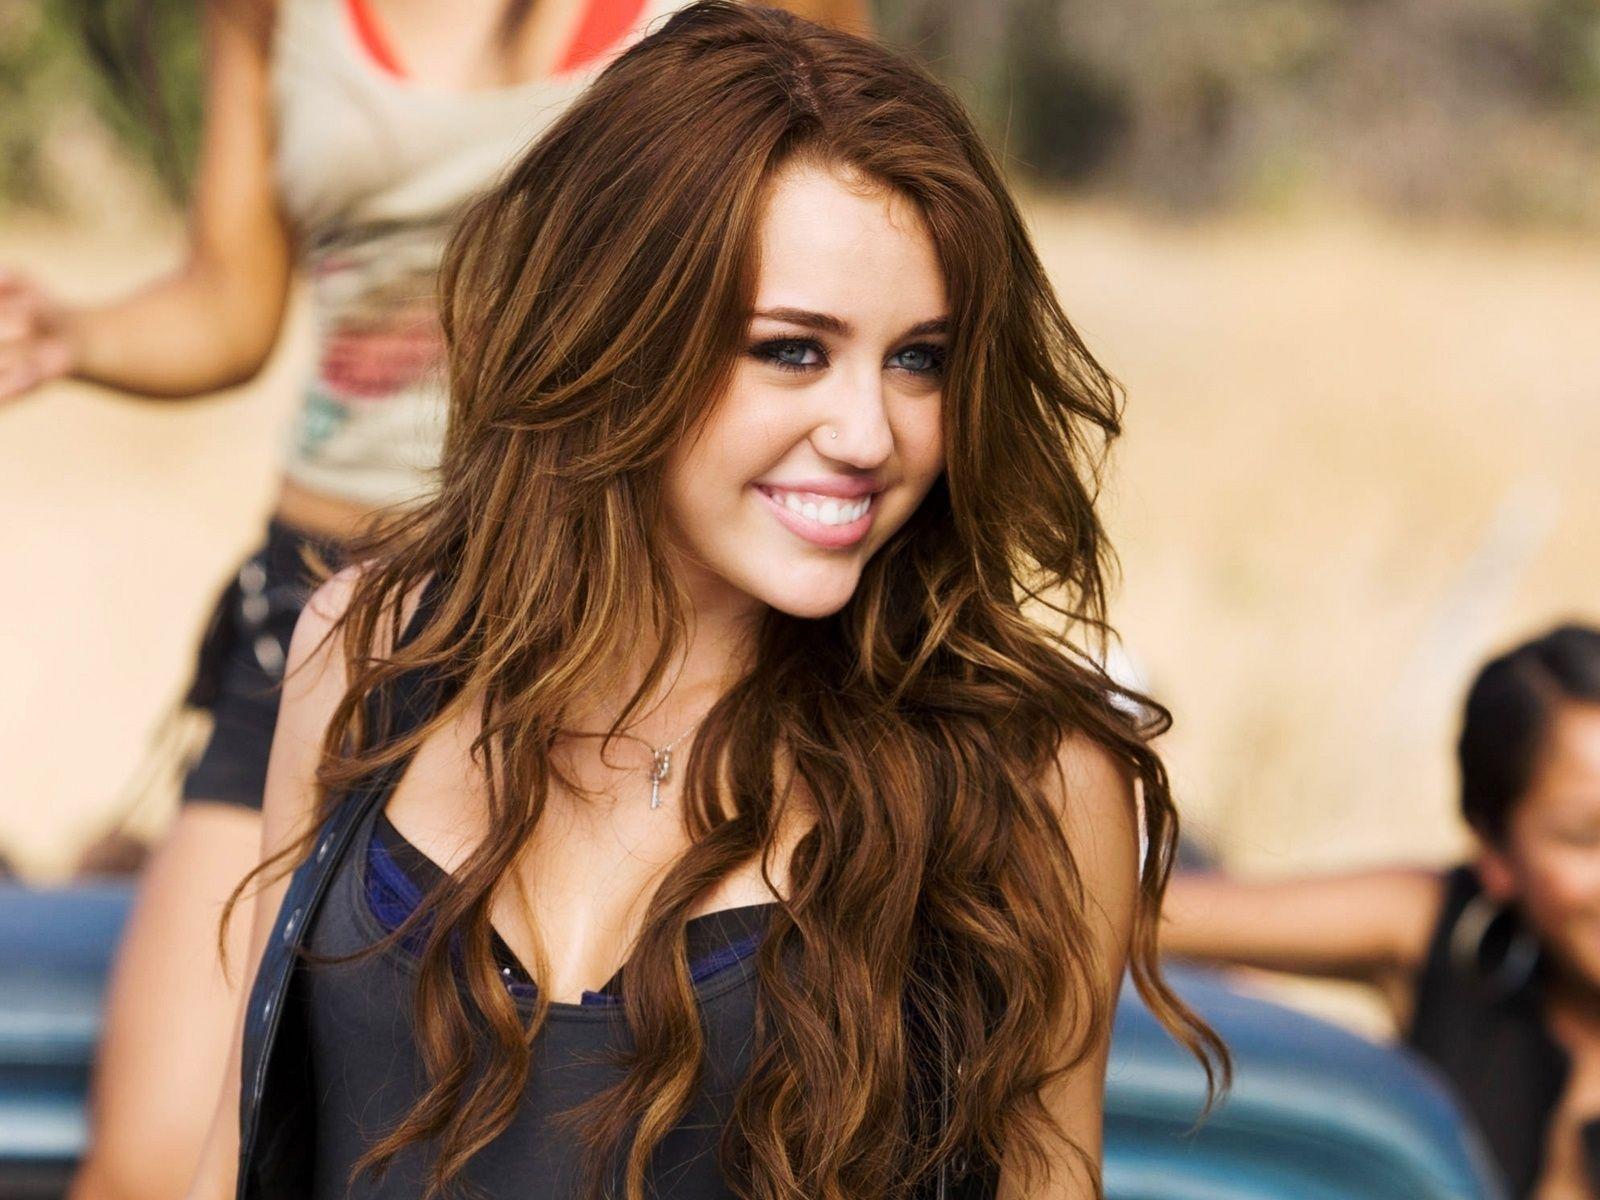 Miley Cyrus Cute 2017 Wallpapers